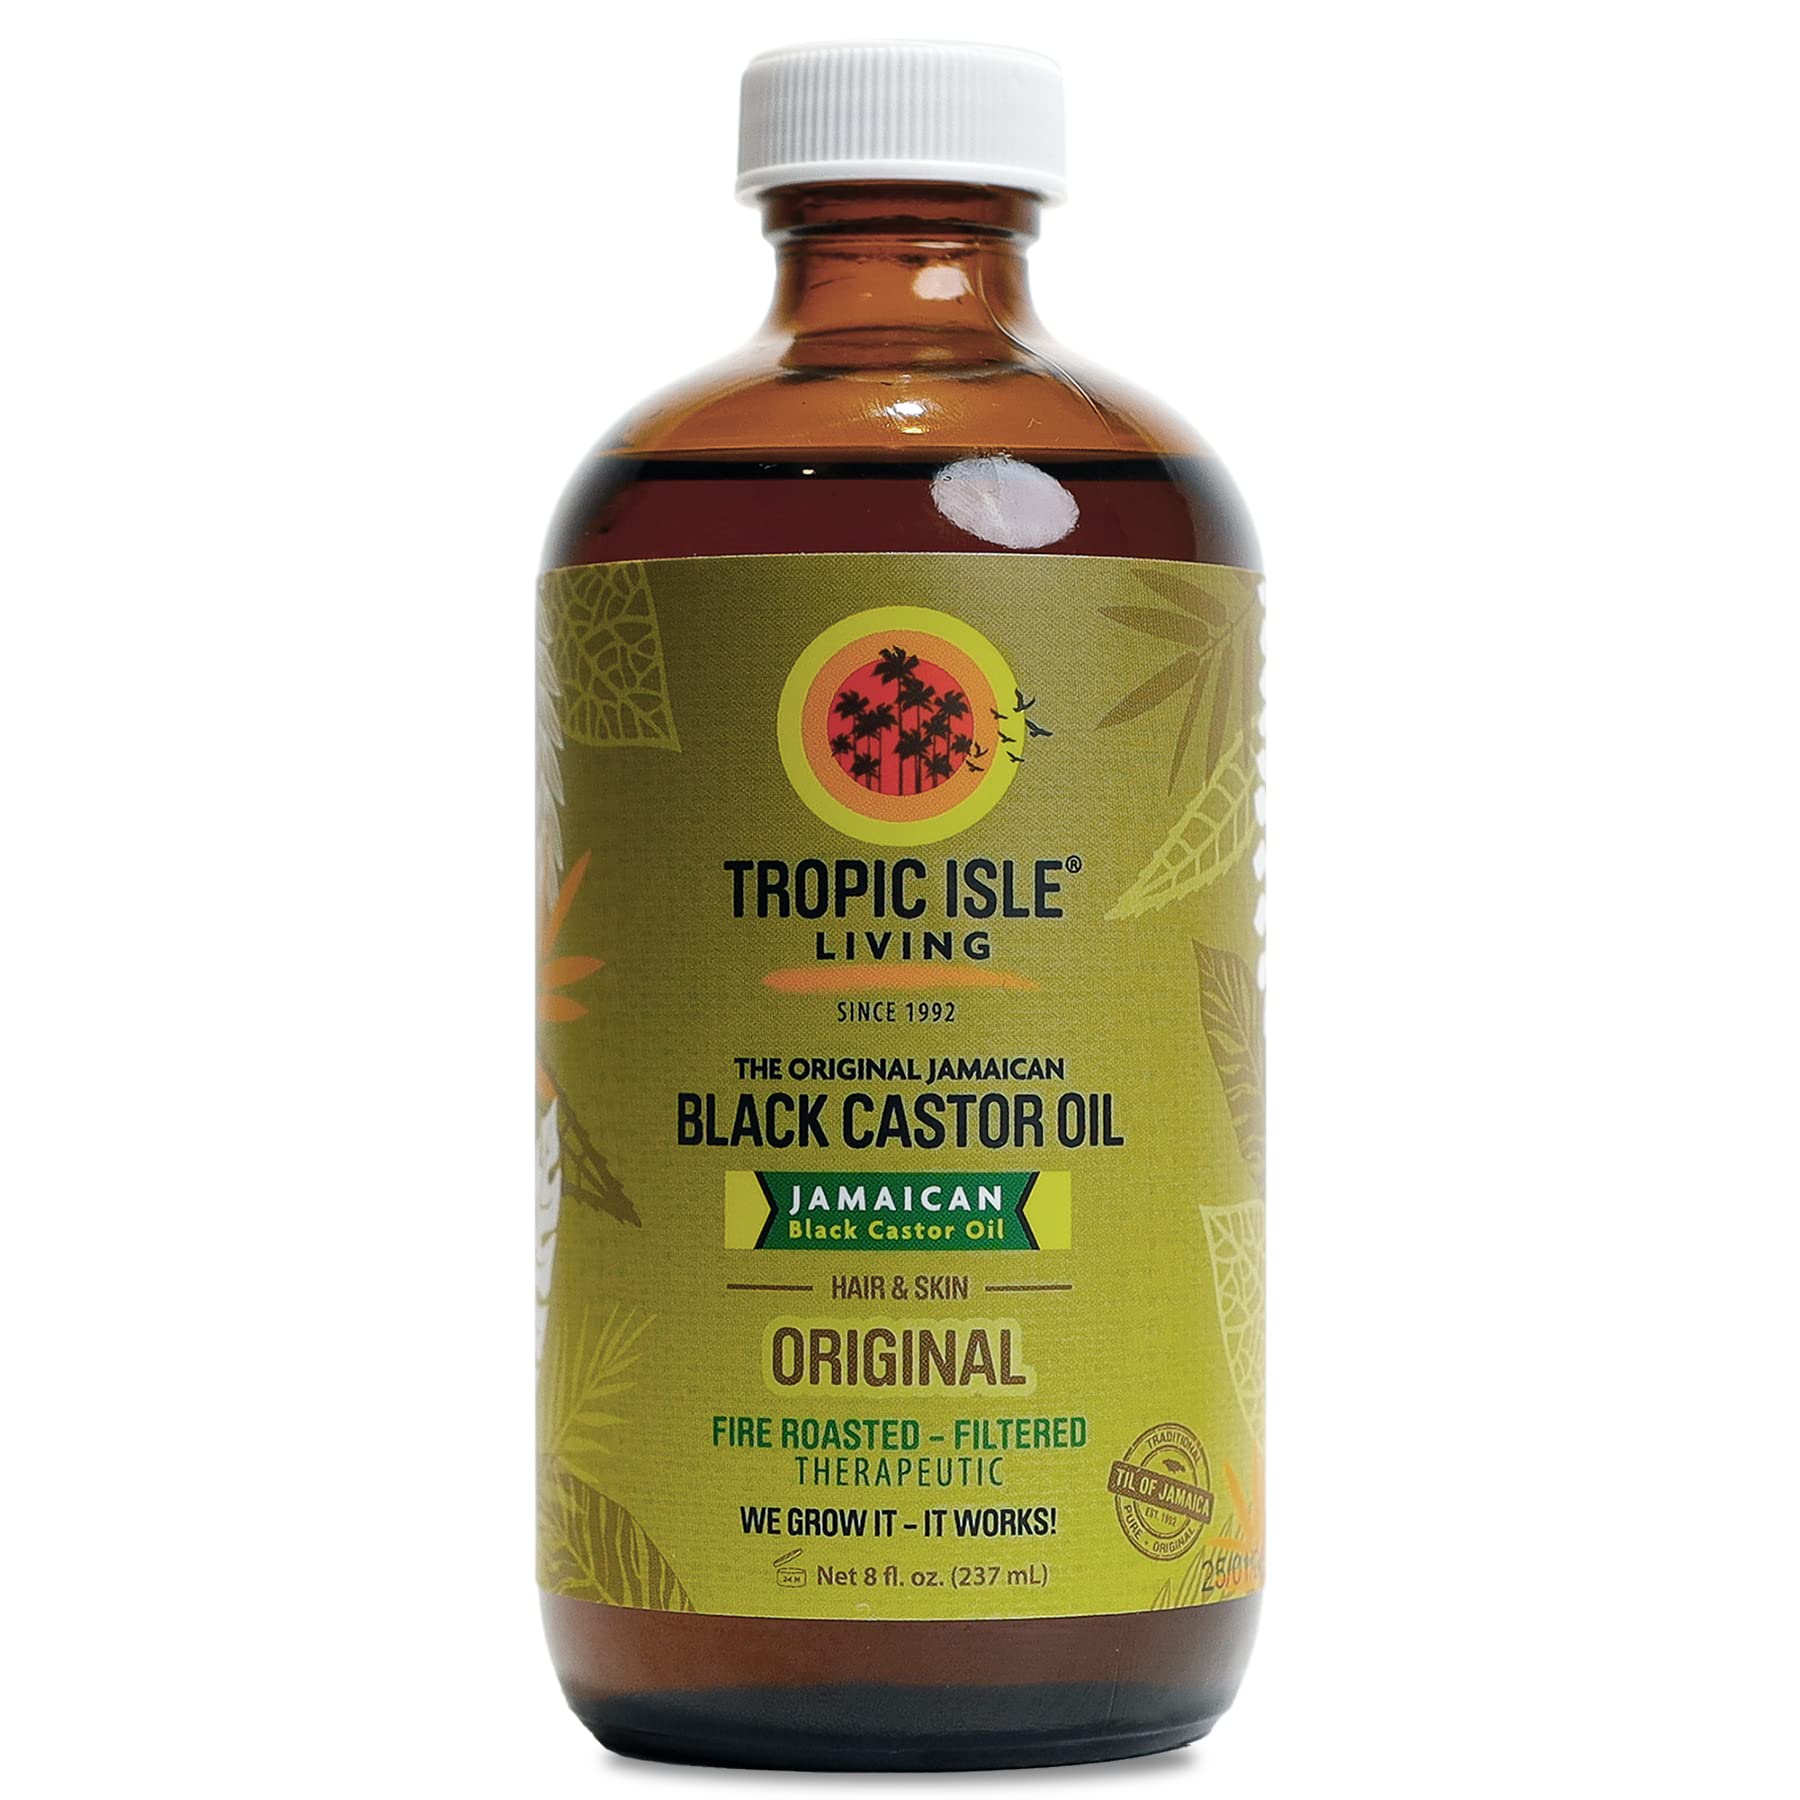 All Natural Jamaican Black Castor Oil | Rich in Vitamin E, Omega Fatty Acids and Minerals | For Hair Growth Oil, Skin Conditioning, Eyebrows & Eyelashes, Scalp and Nail Care | Grow, Strengthen, Moisture & Repair - Glass Bottle 8oz